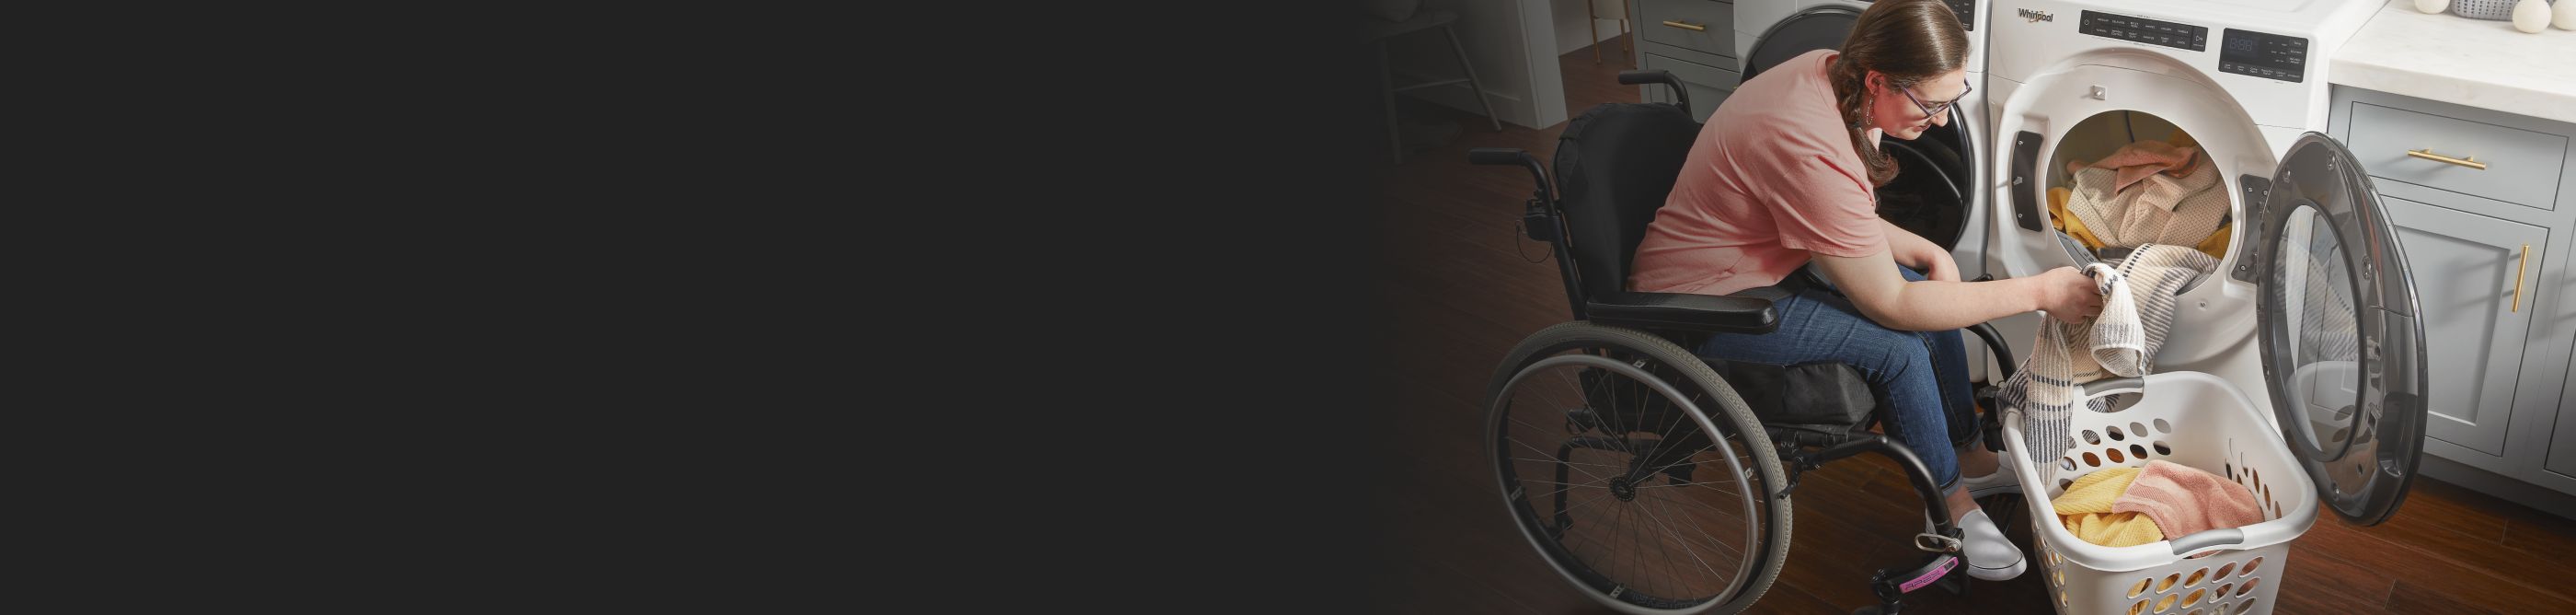 Person in a wheelchair using a Whirlpool® dryer